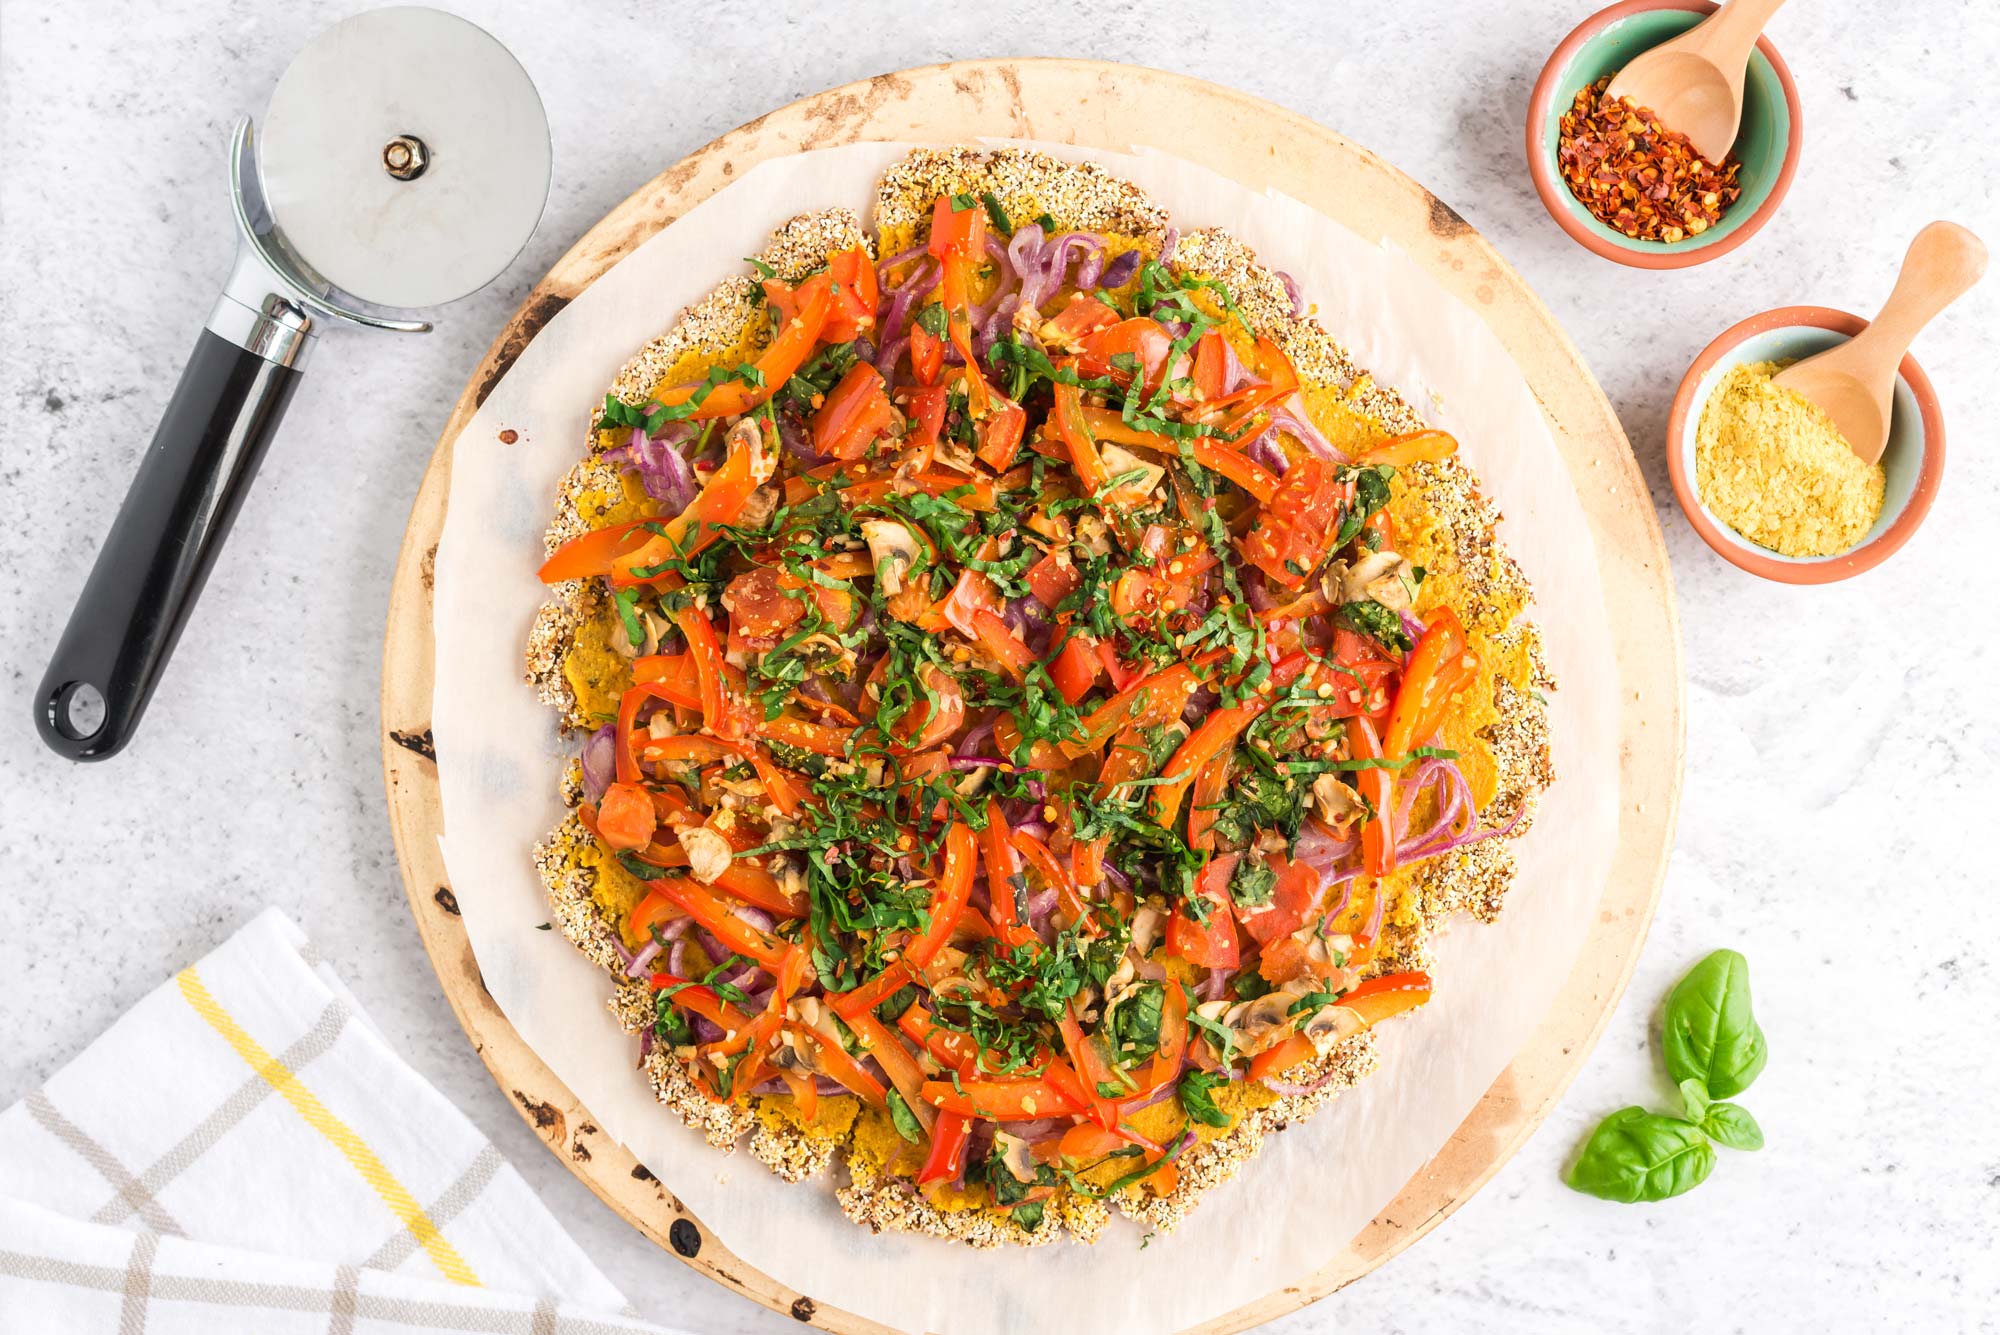 Plant-based Pizzas: Turmeric cashew cheese pizza with cauliflower crust